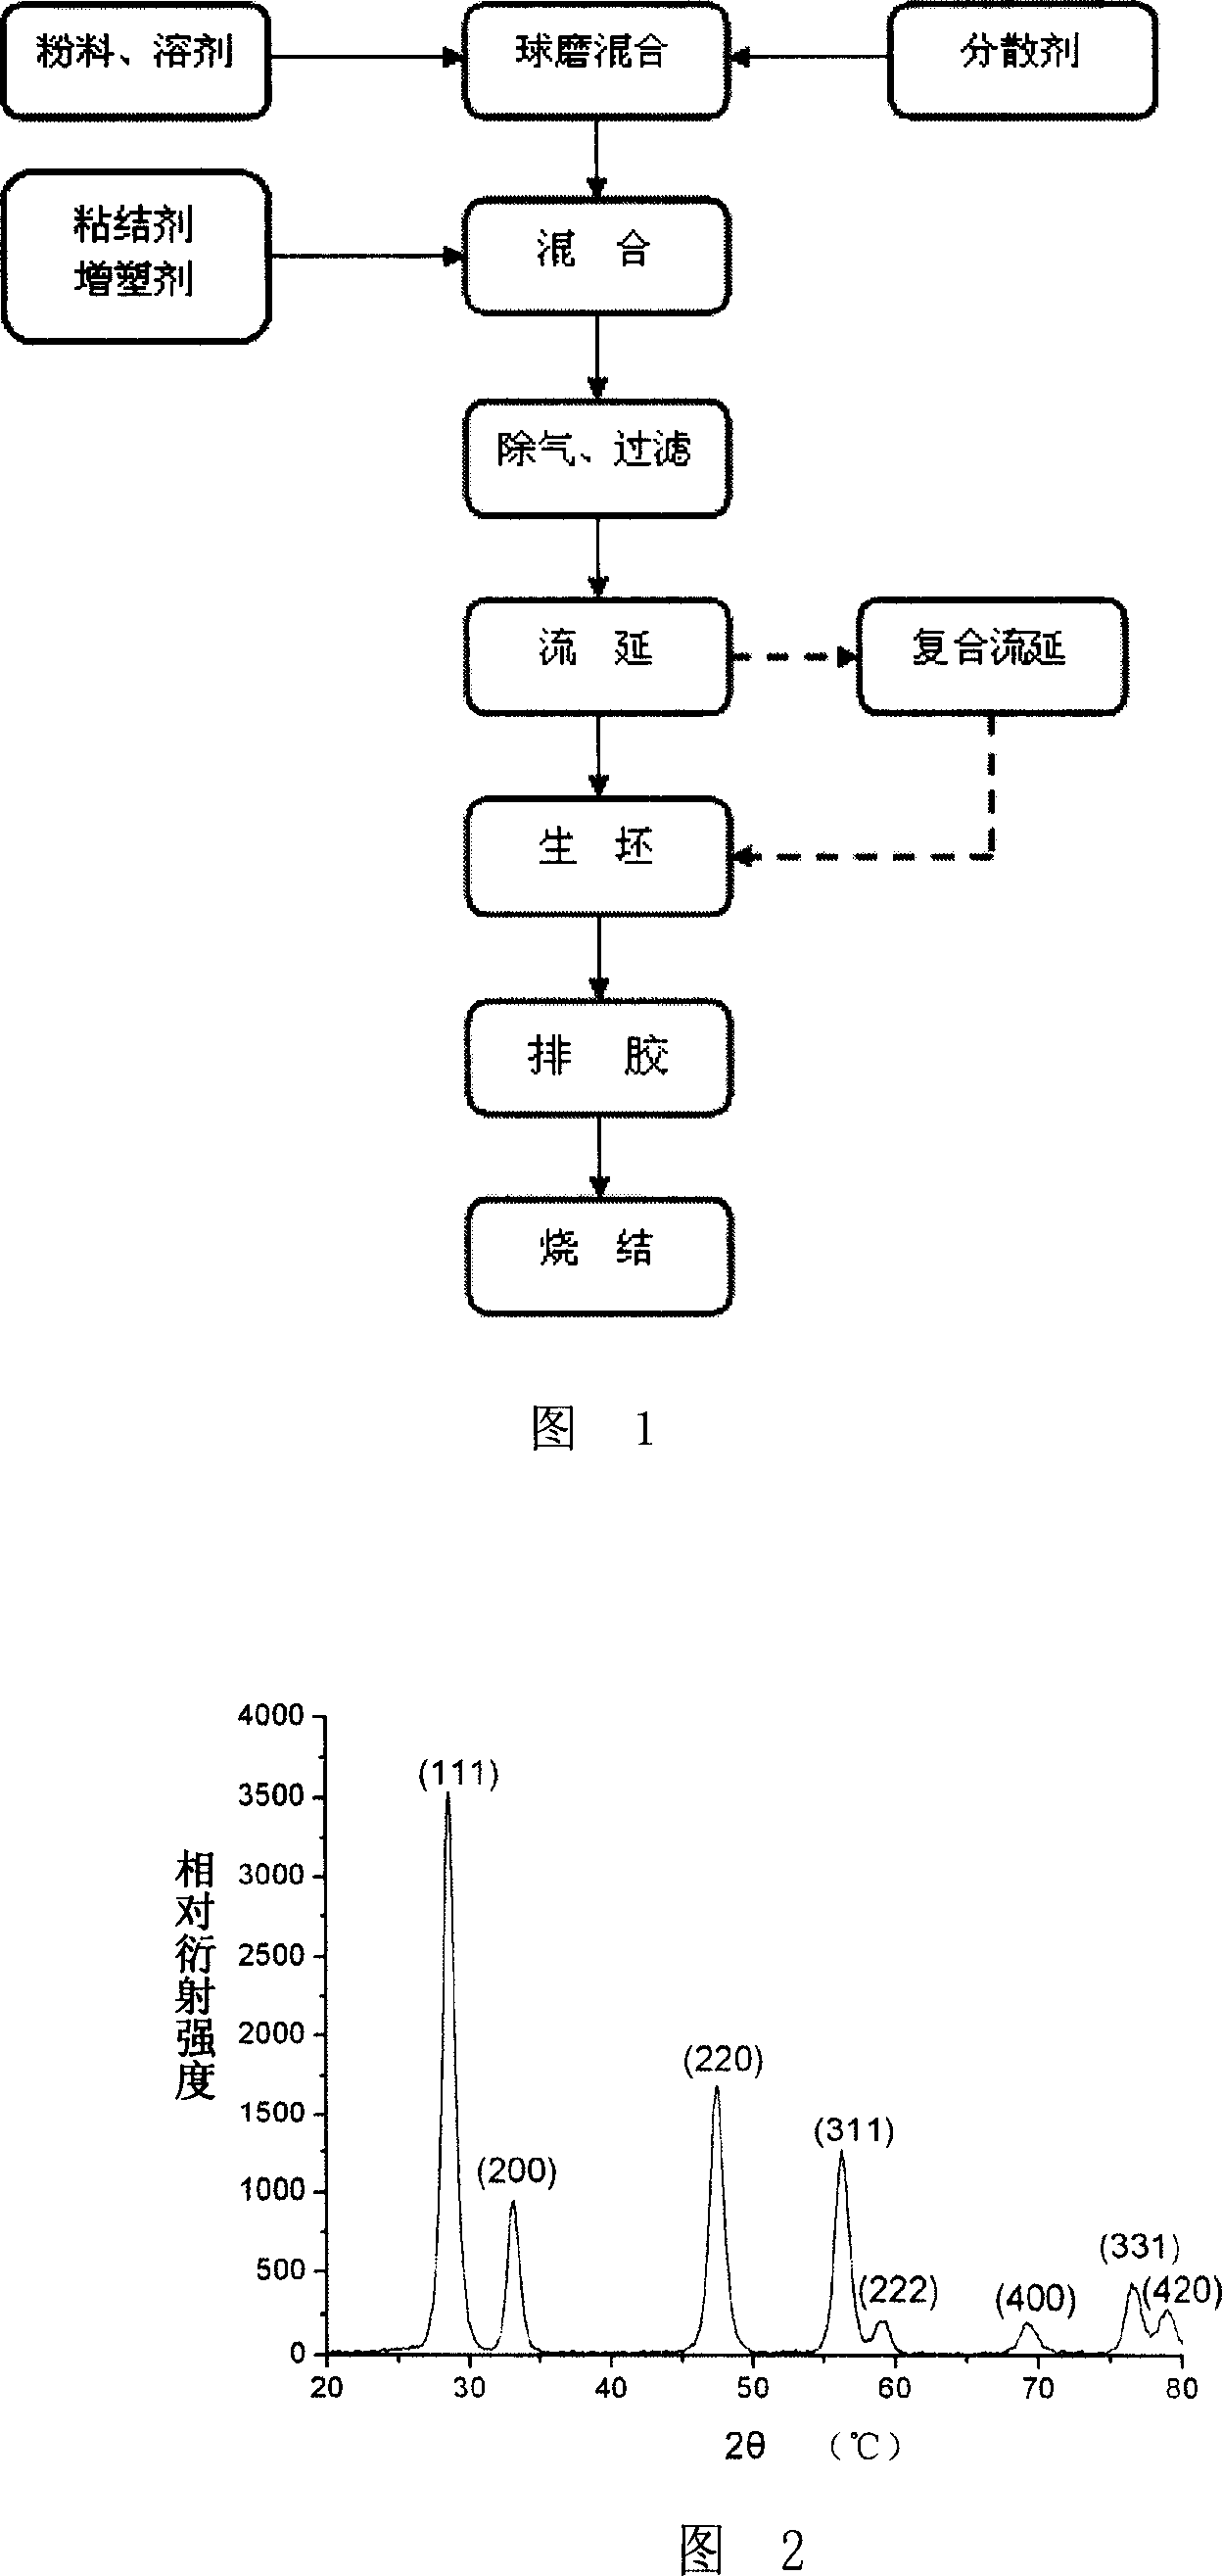 Anode-electrolyte-cathode assembly of middly temp SOFC and preparation method thereof